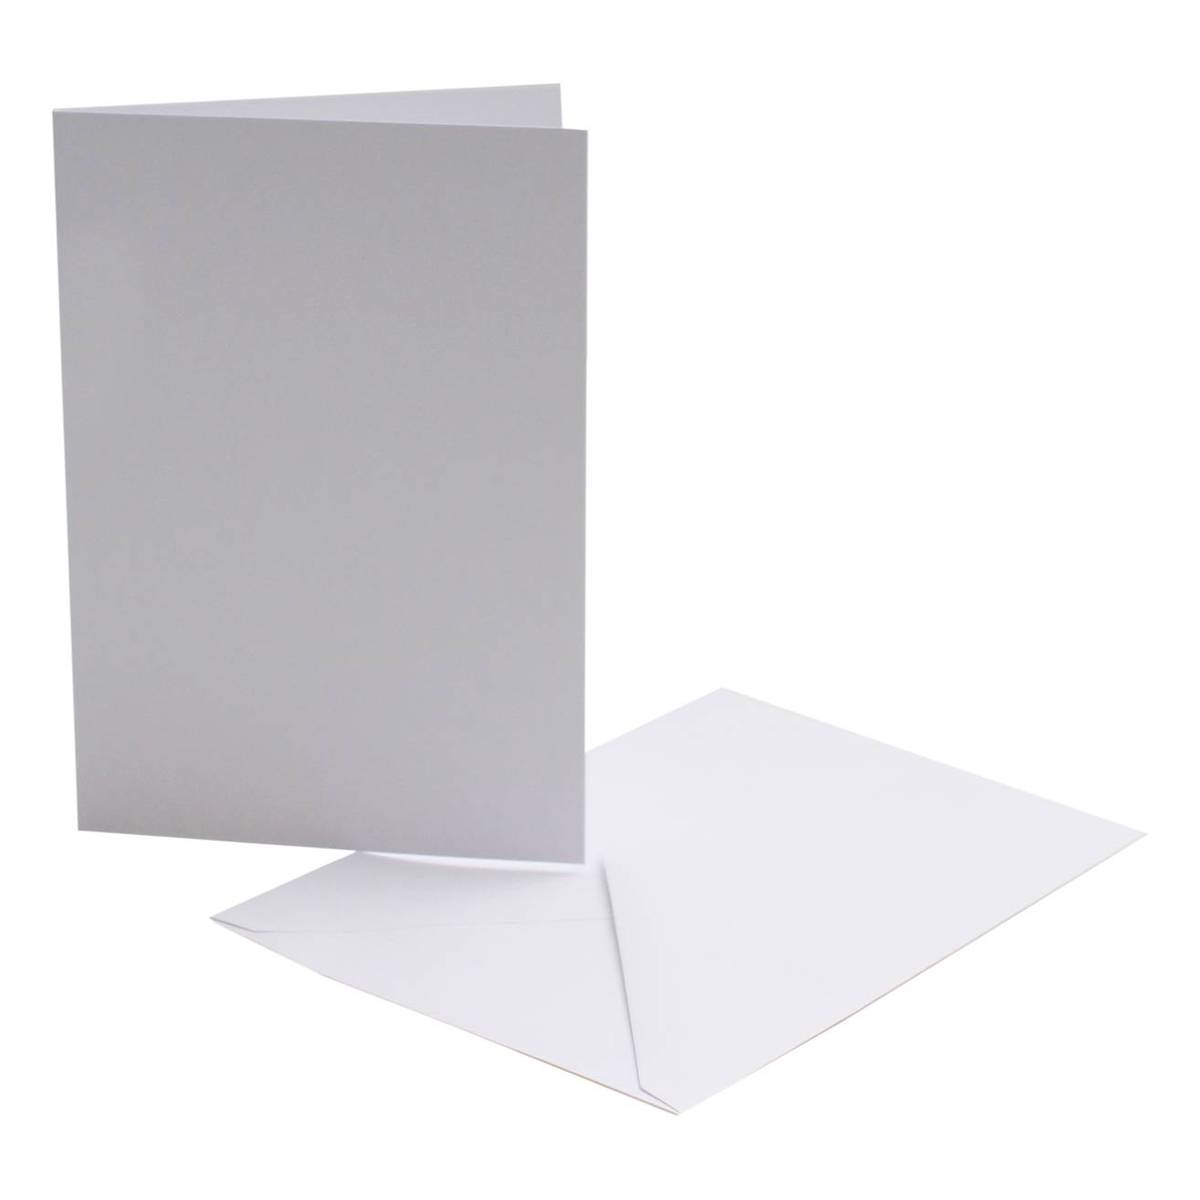 10 x A6 Cream Scalloped Card Blanks With White Envelopes 